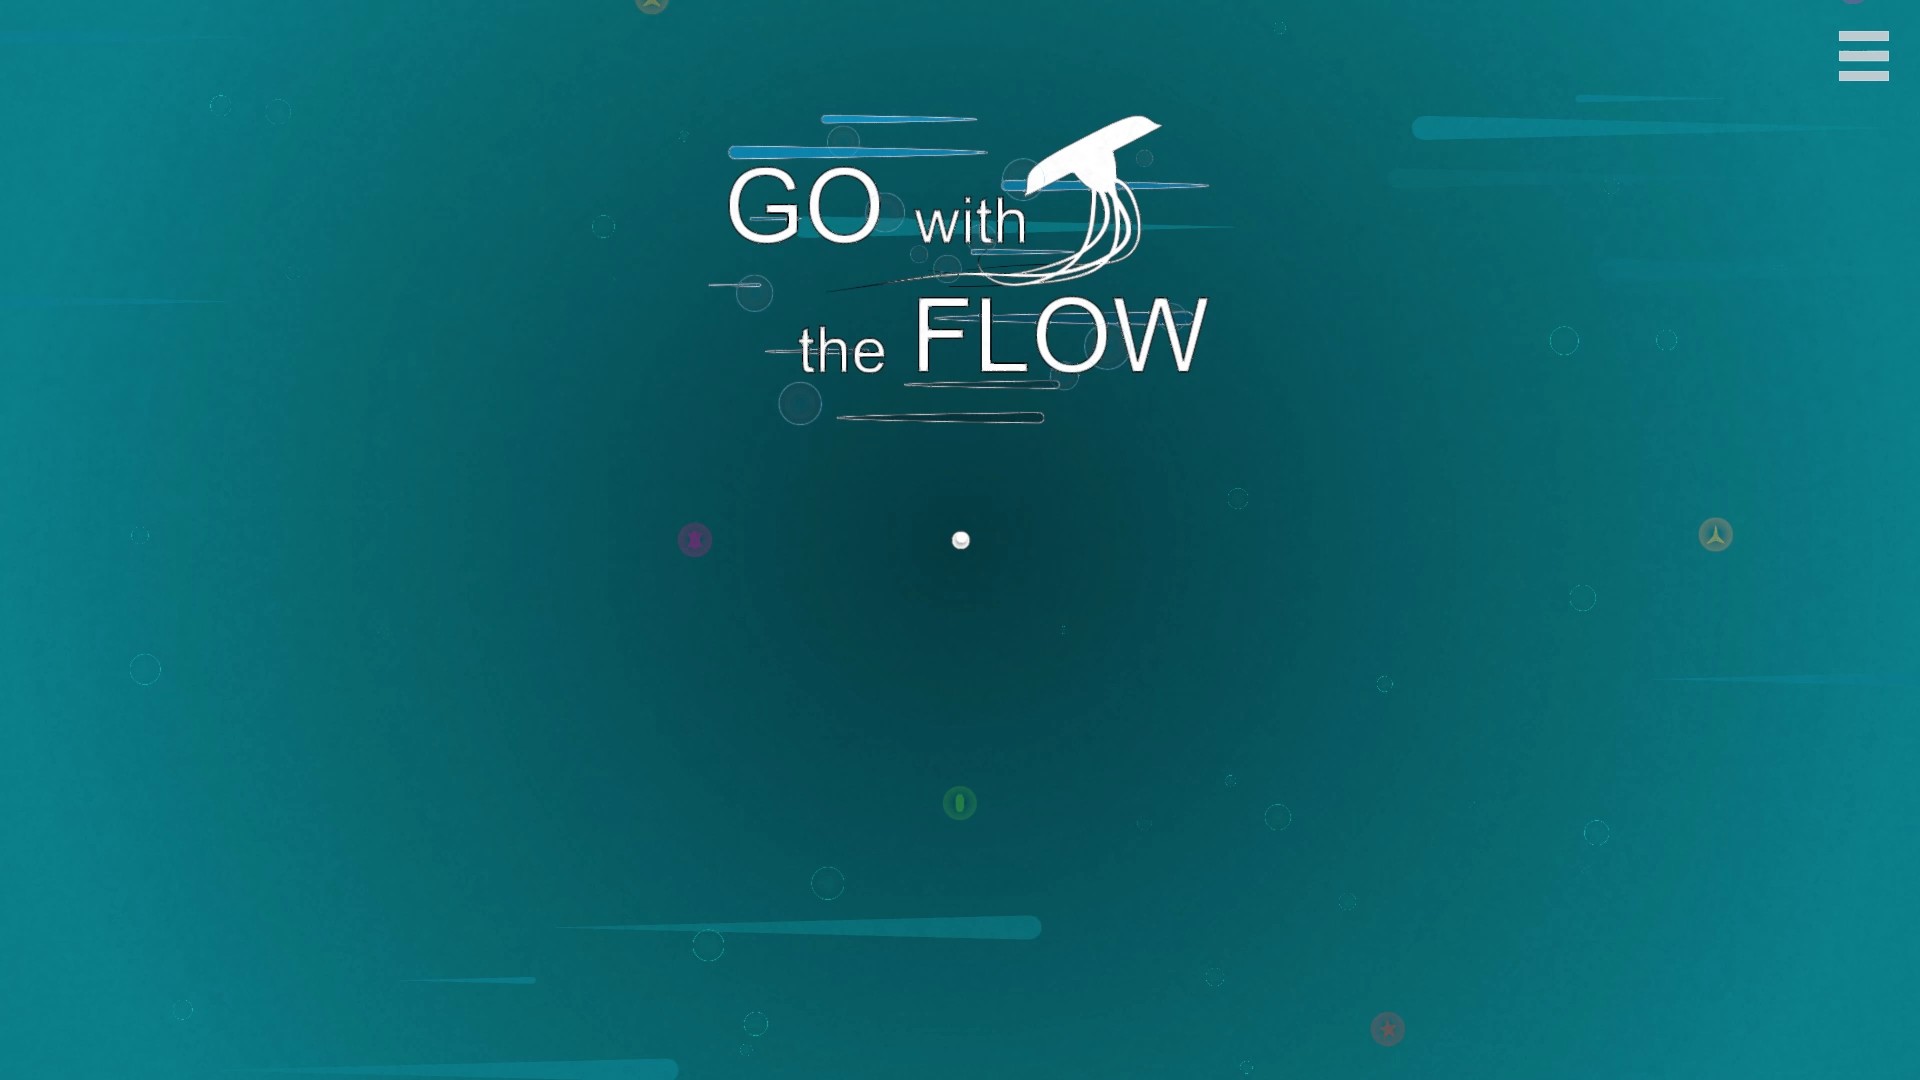 Theflow. Flow (игра). Зе Фло. The Flow Education. Go with the Flow.